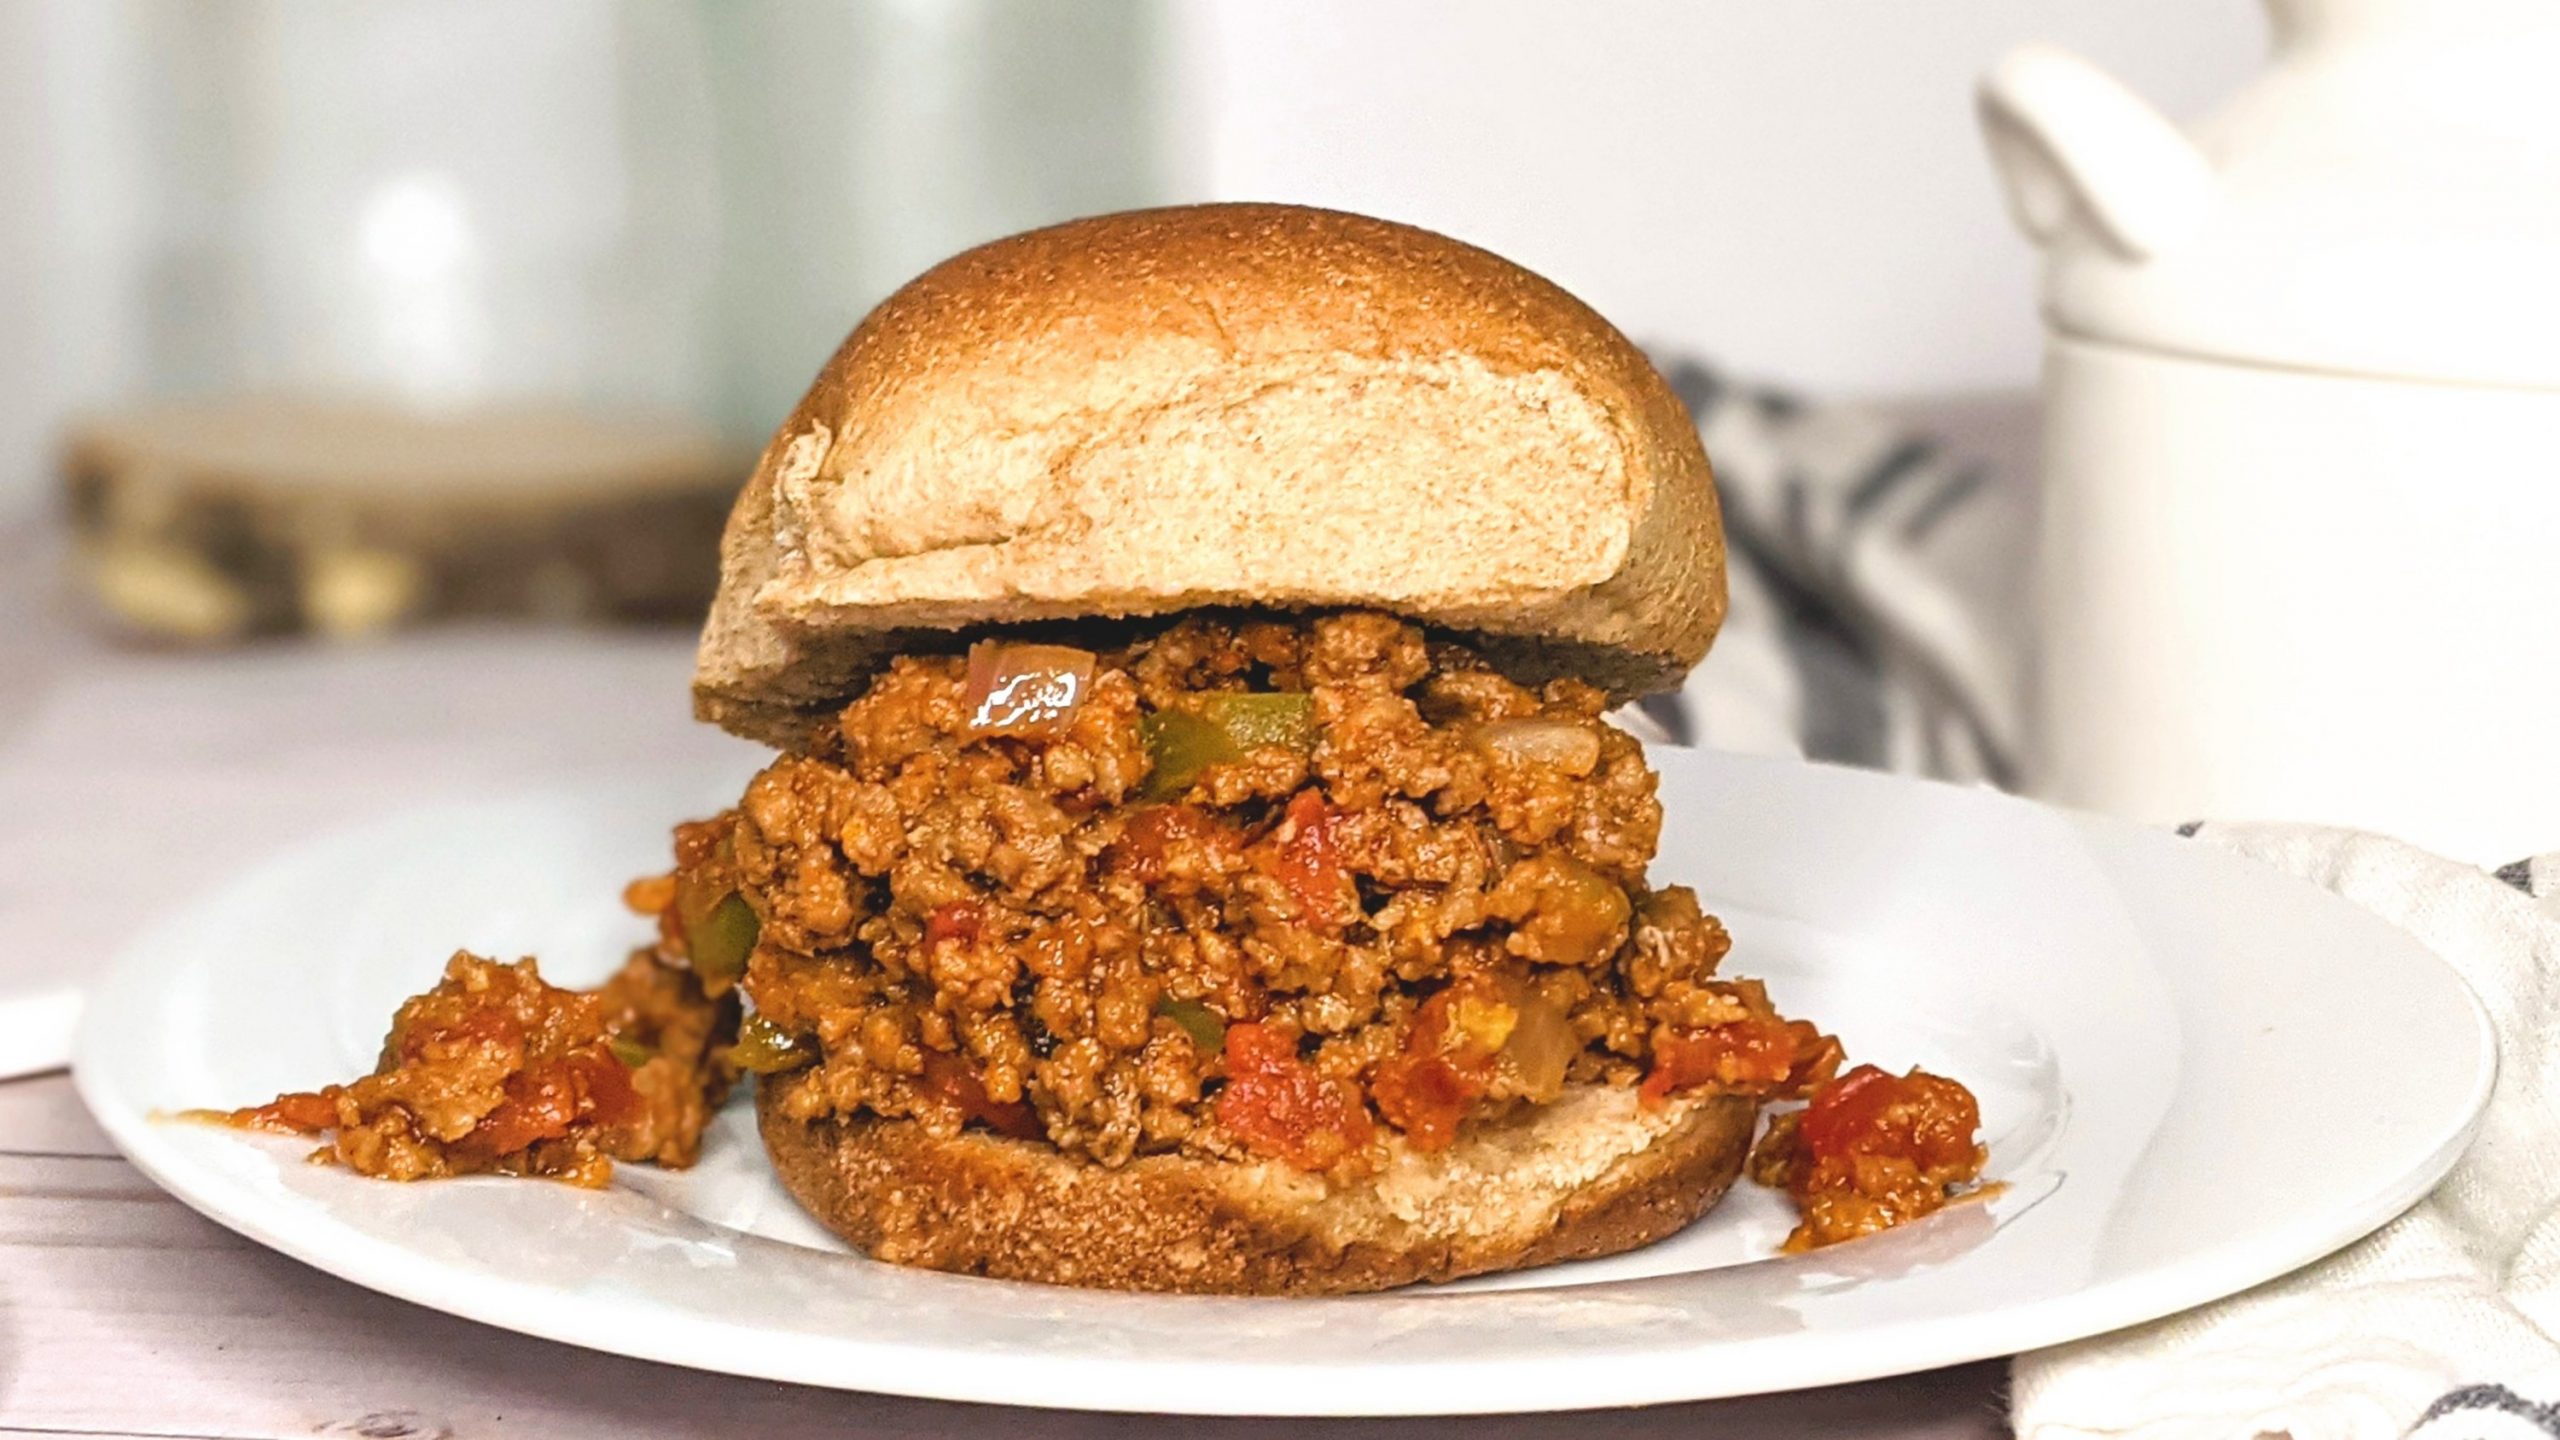 gluten free sloppy joes recipe easy no salt sloppy joes with onions bell pepper tomatoes and spices gluten free